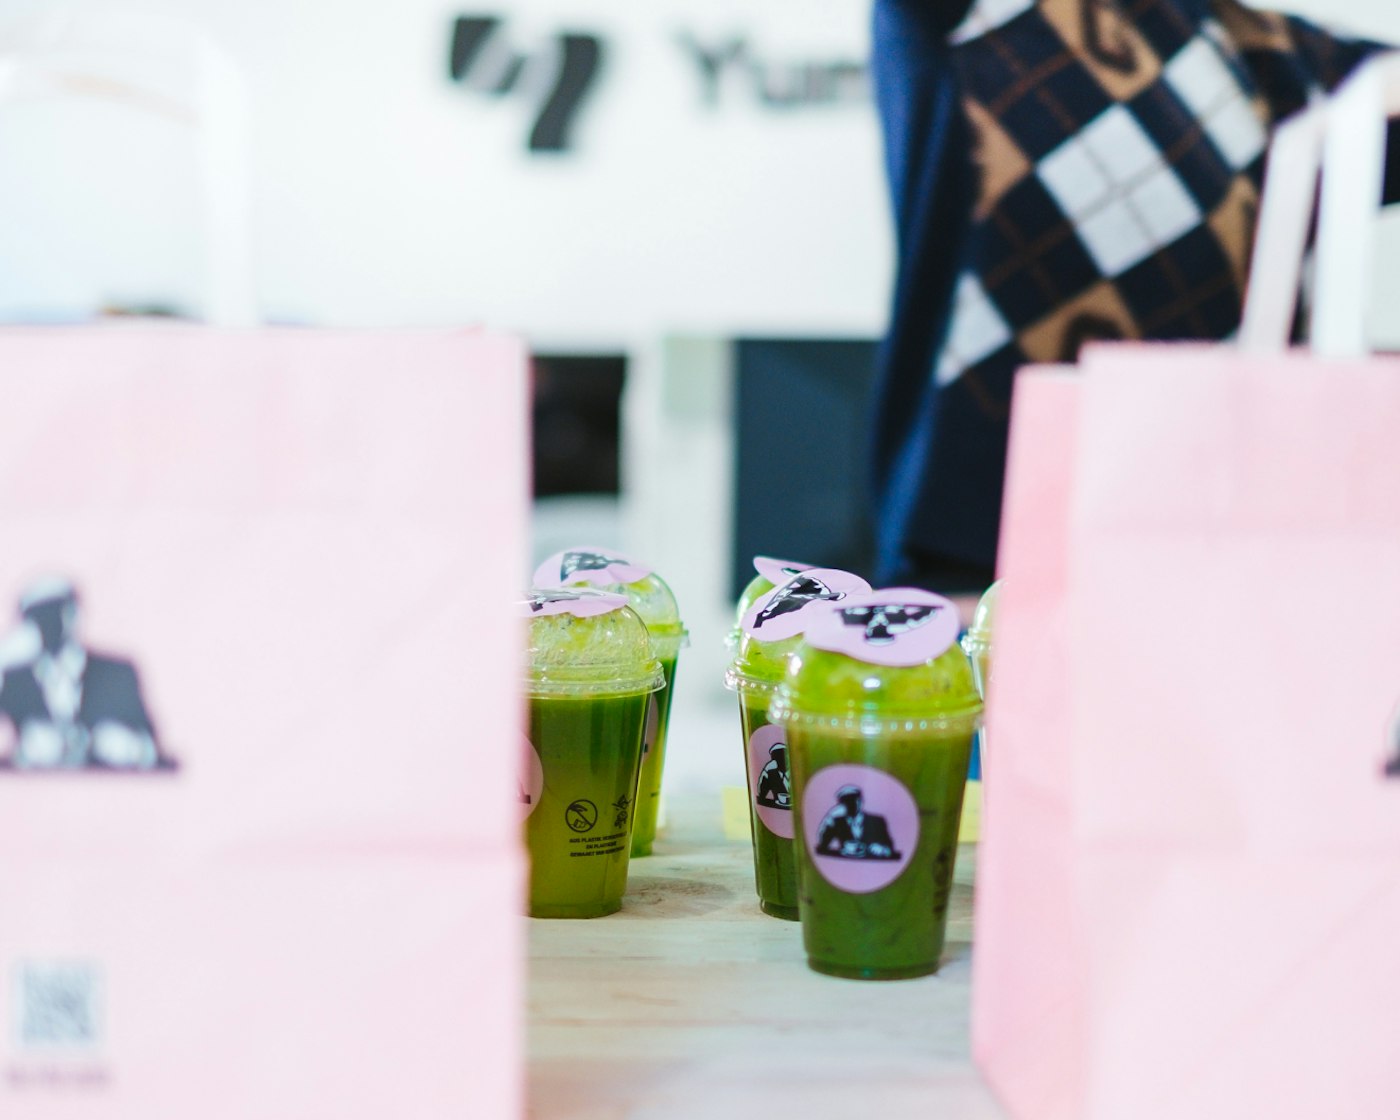 Plastic cups with a plant based green smoothie in them, in between two pink paper bags